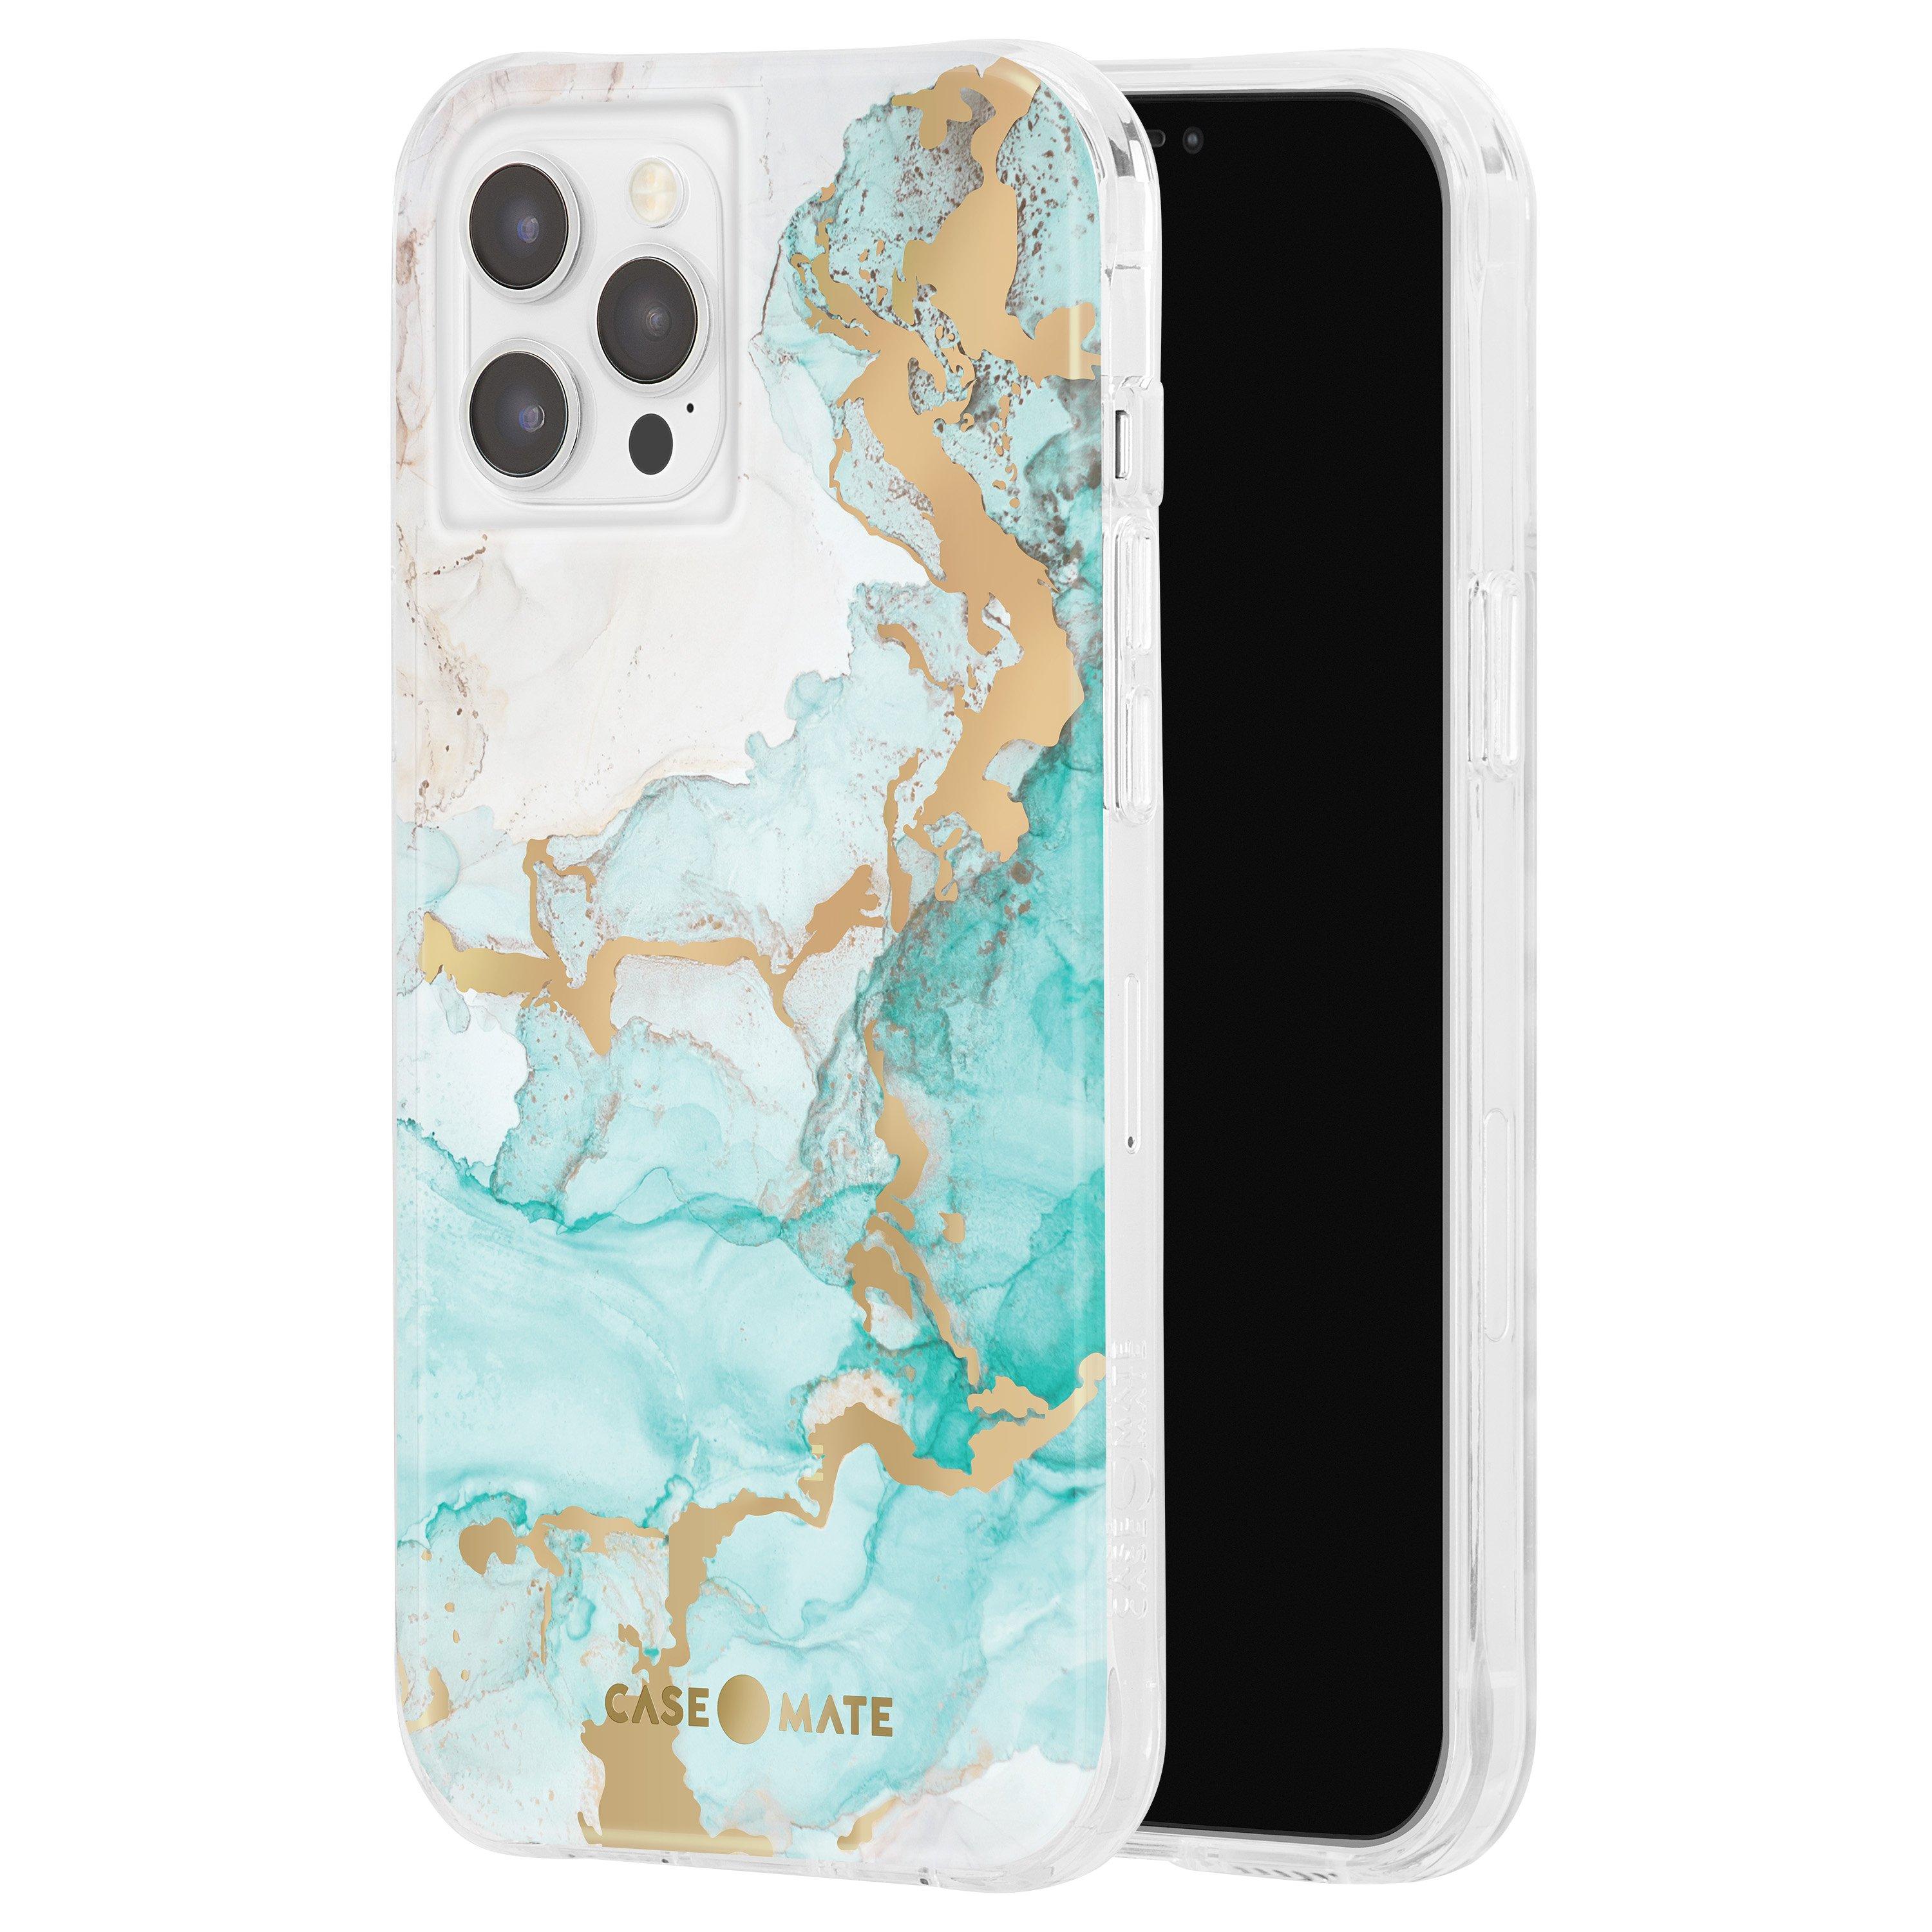 Case-Mate Case for iPhone 12/12 Pro Ocean Marble